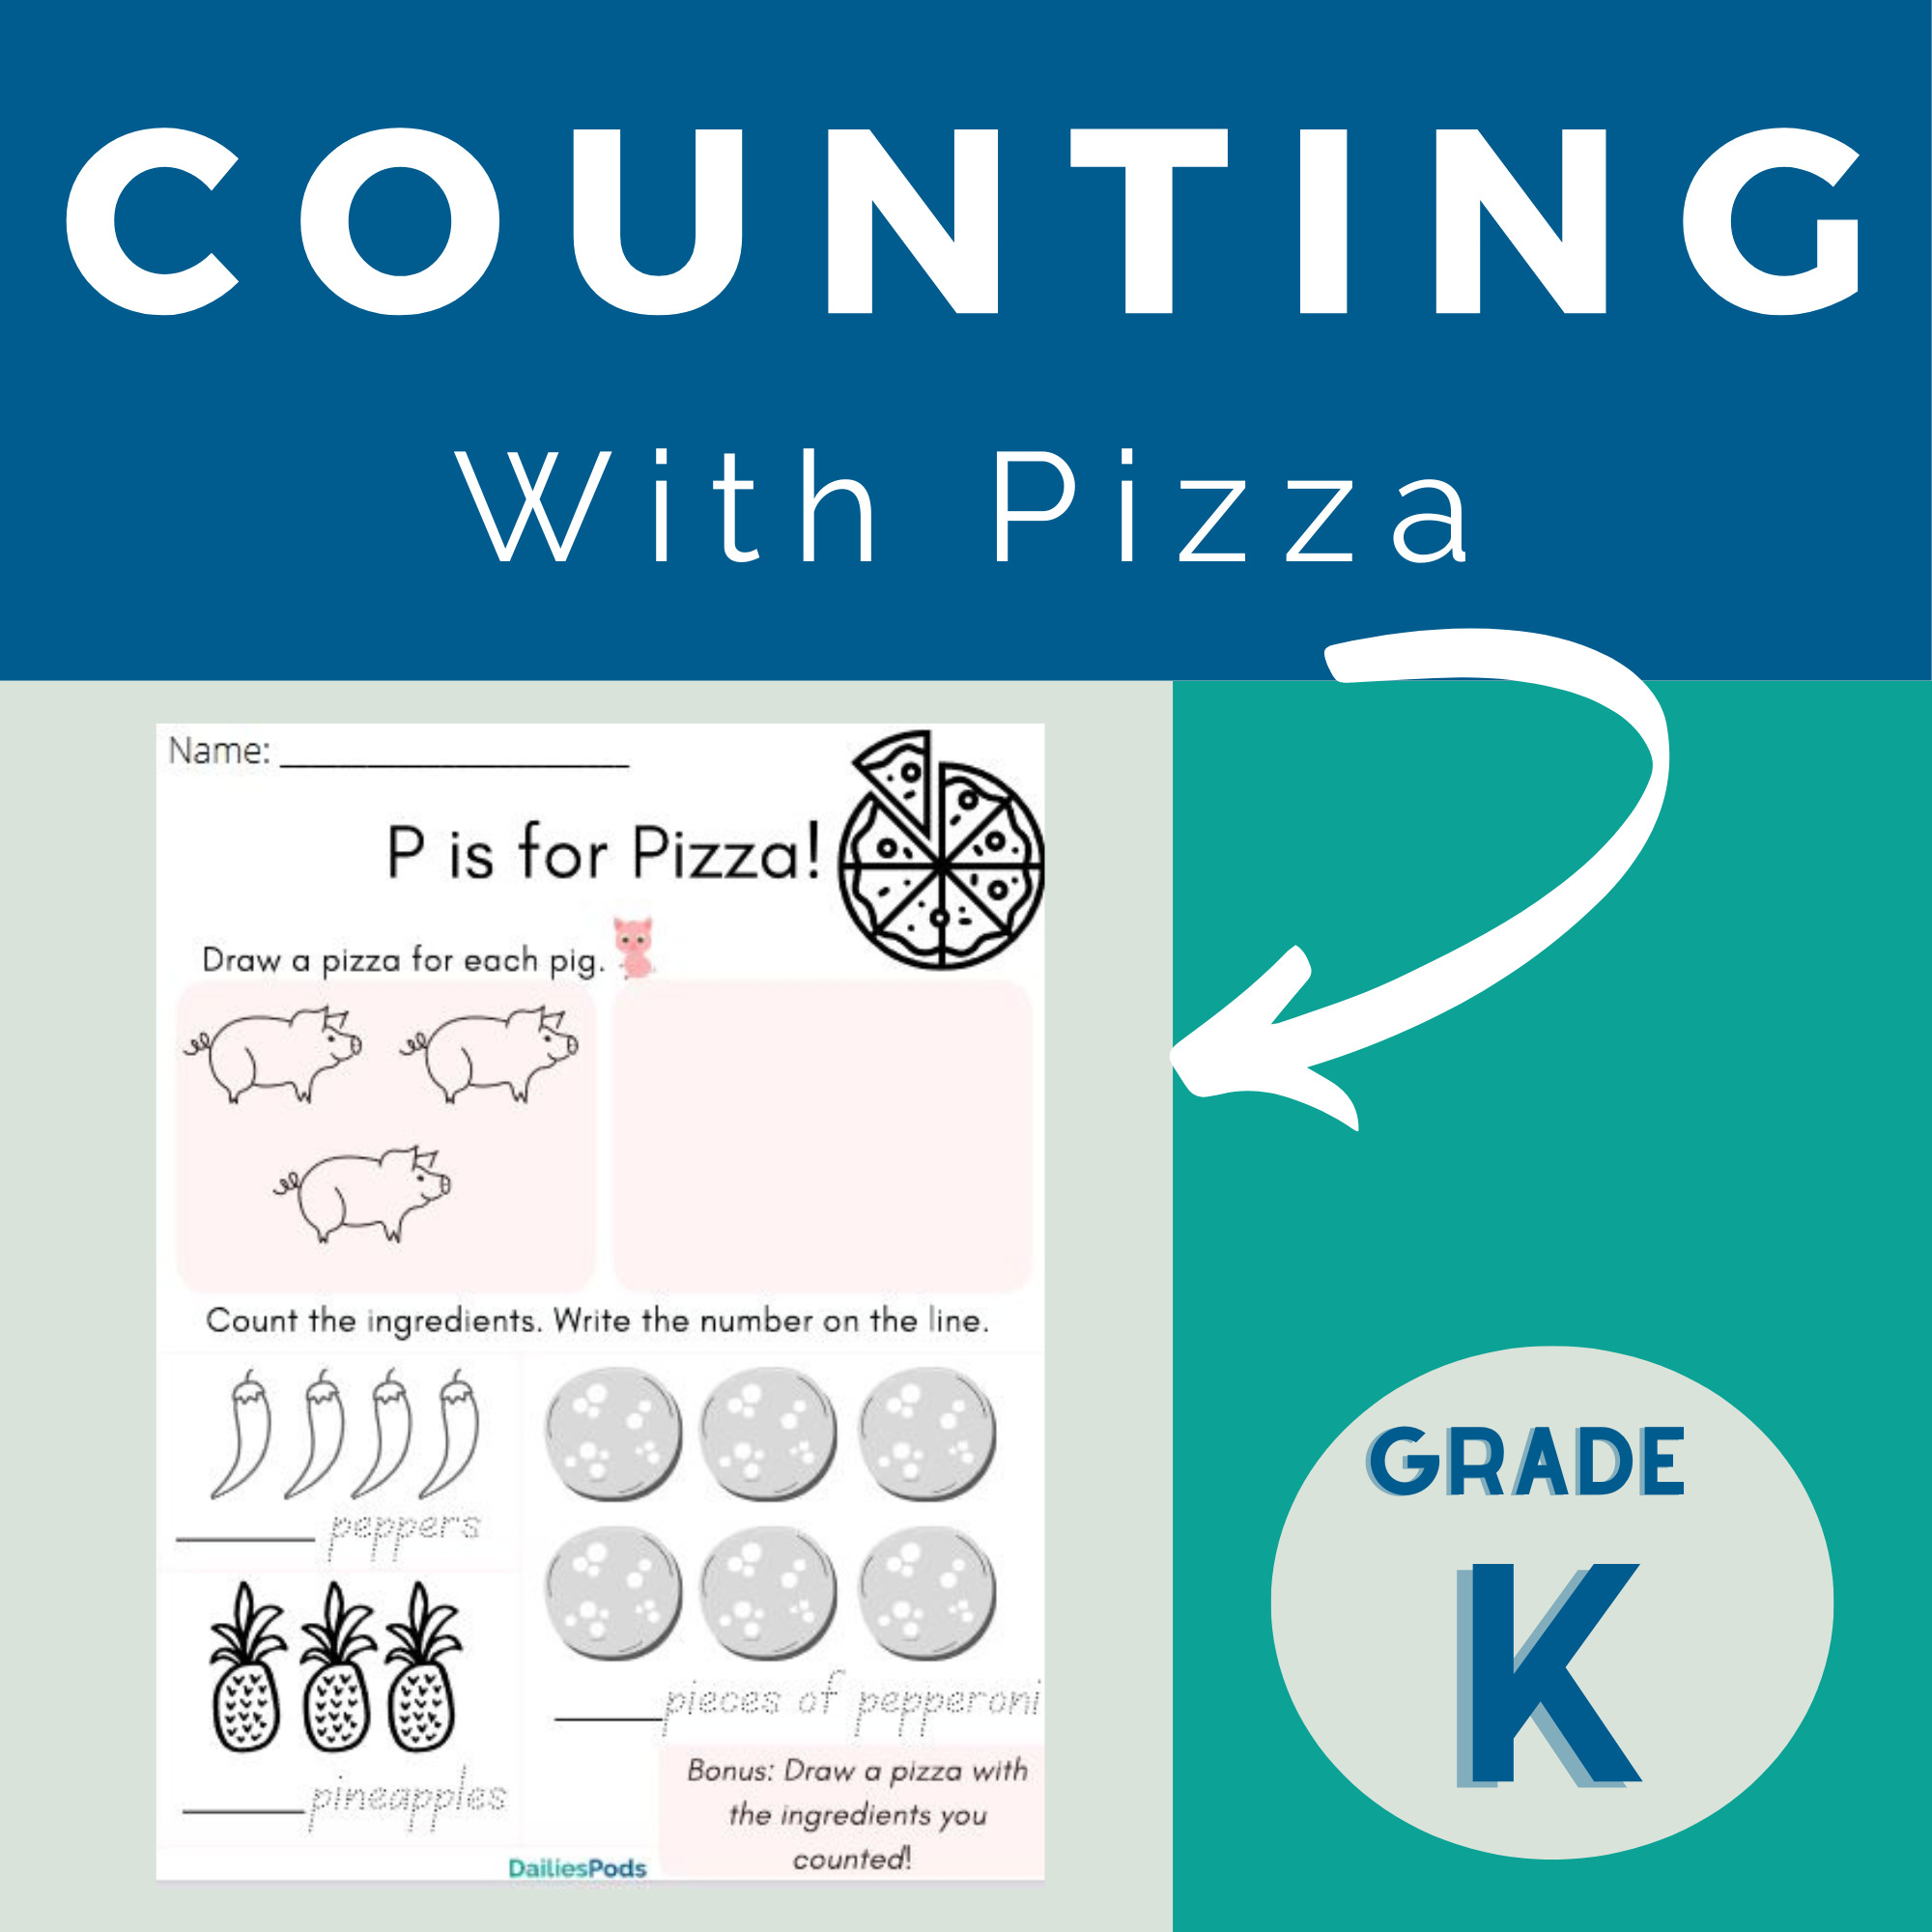 Counting with pizza